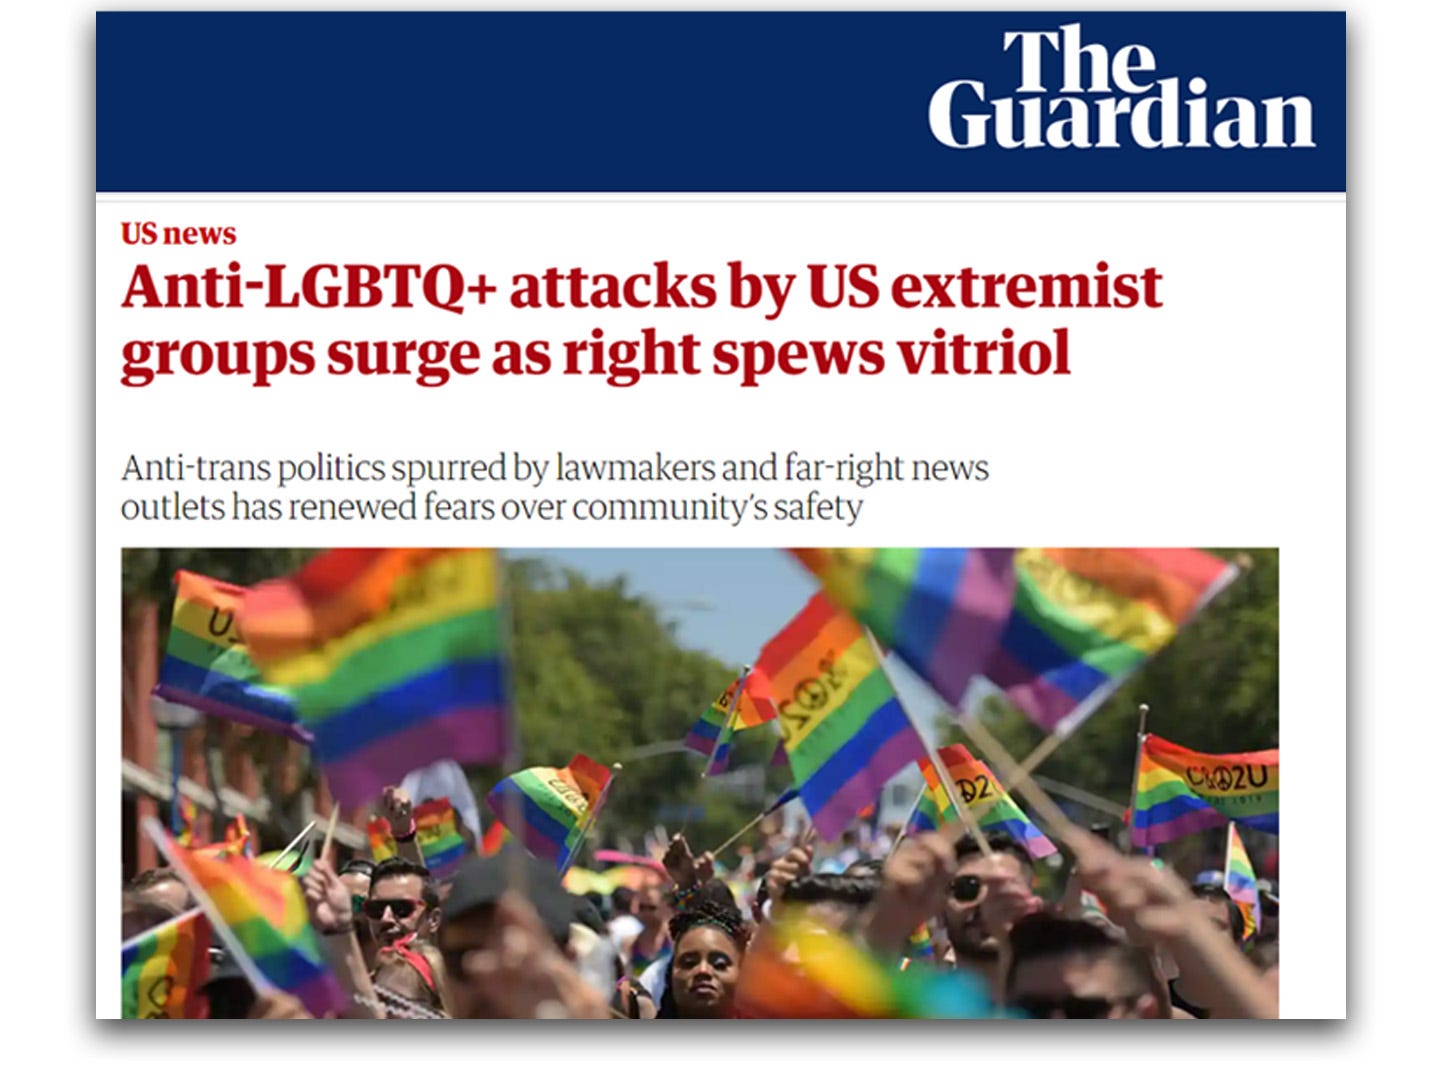 Headline from The Guardian "Anti-LGBTQ+ attacks by US extremist groups surge as right spews vitriol"